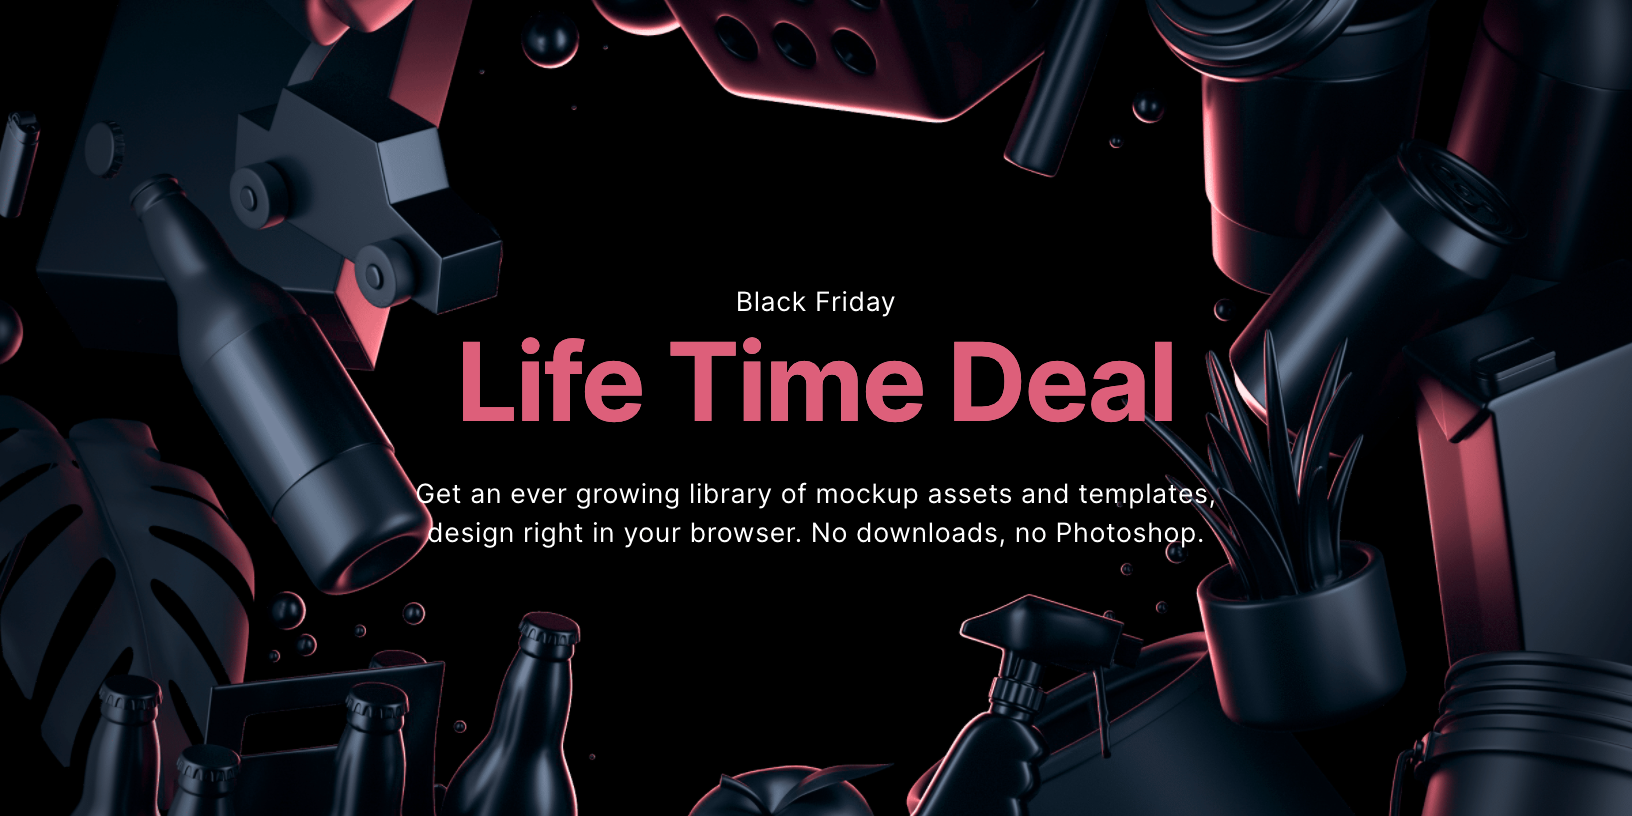 Life Time Deal by Artboard Studio